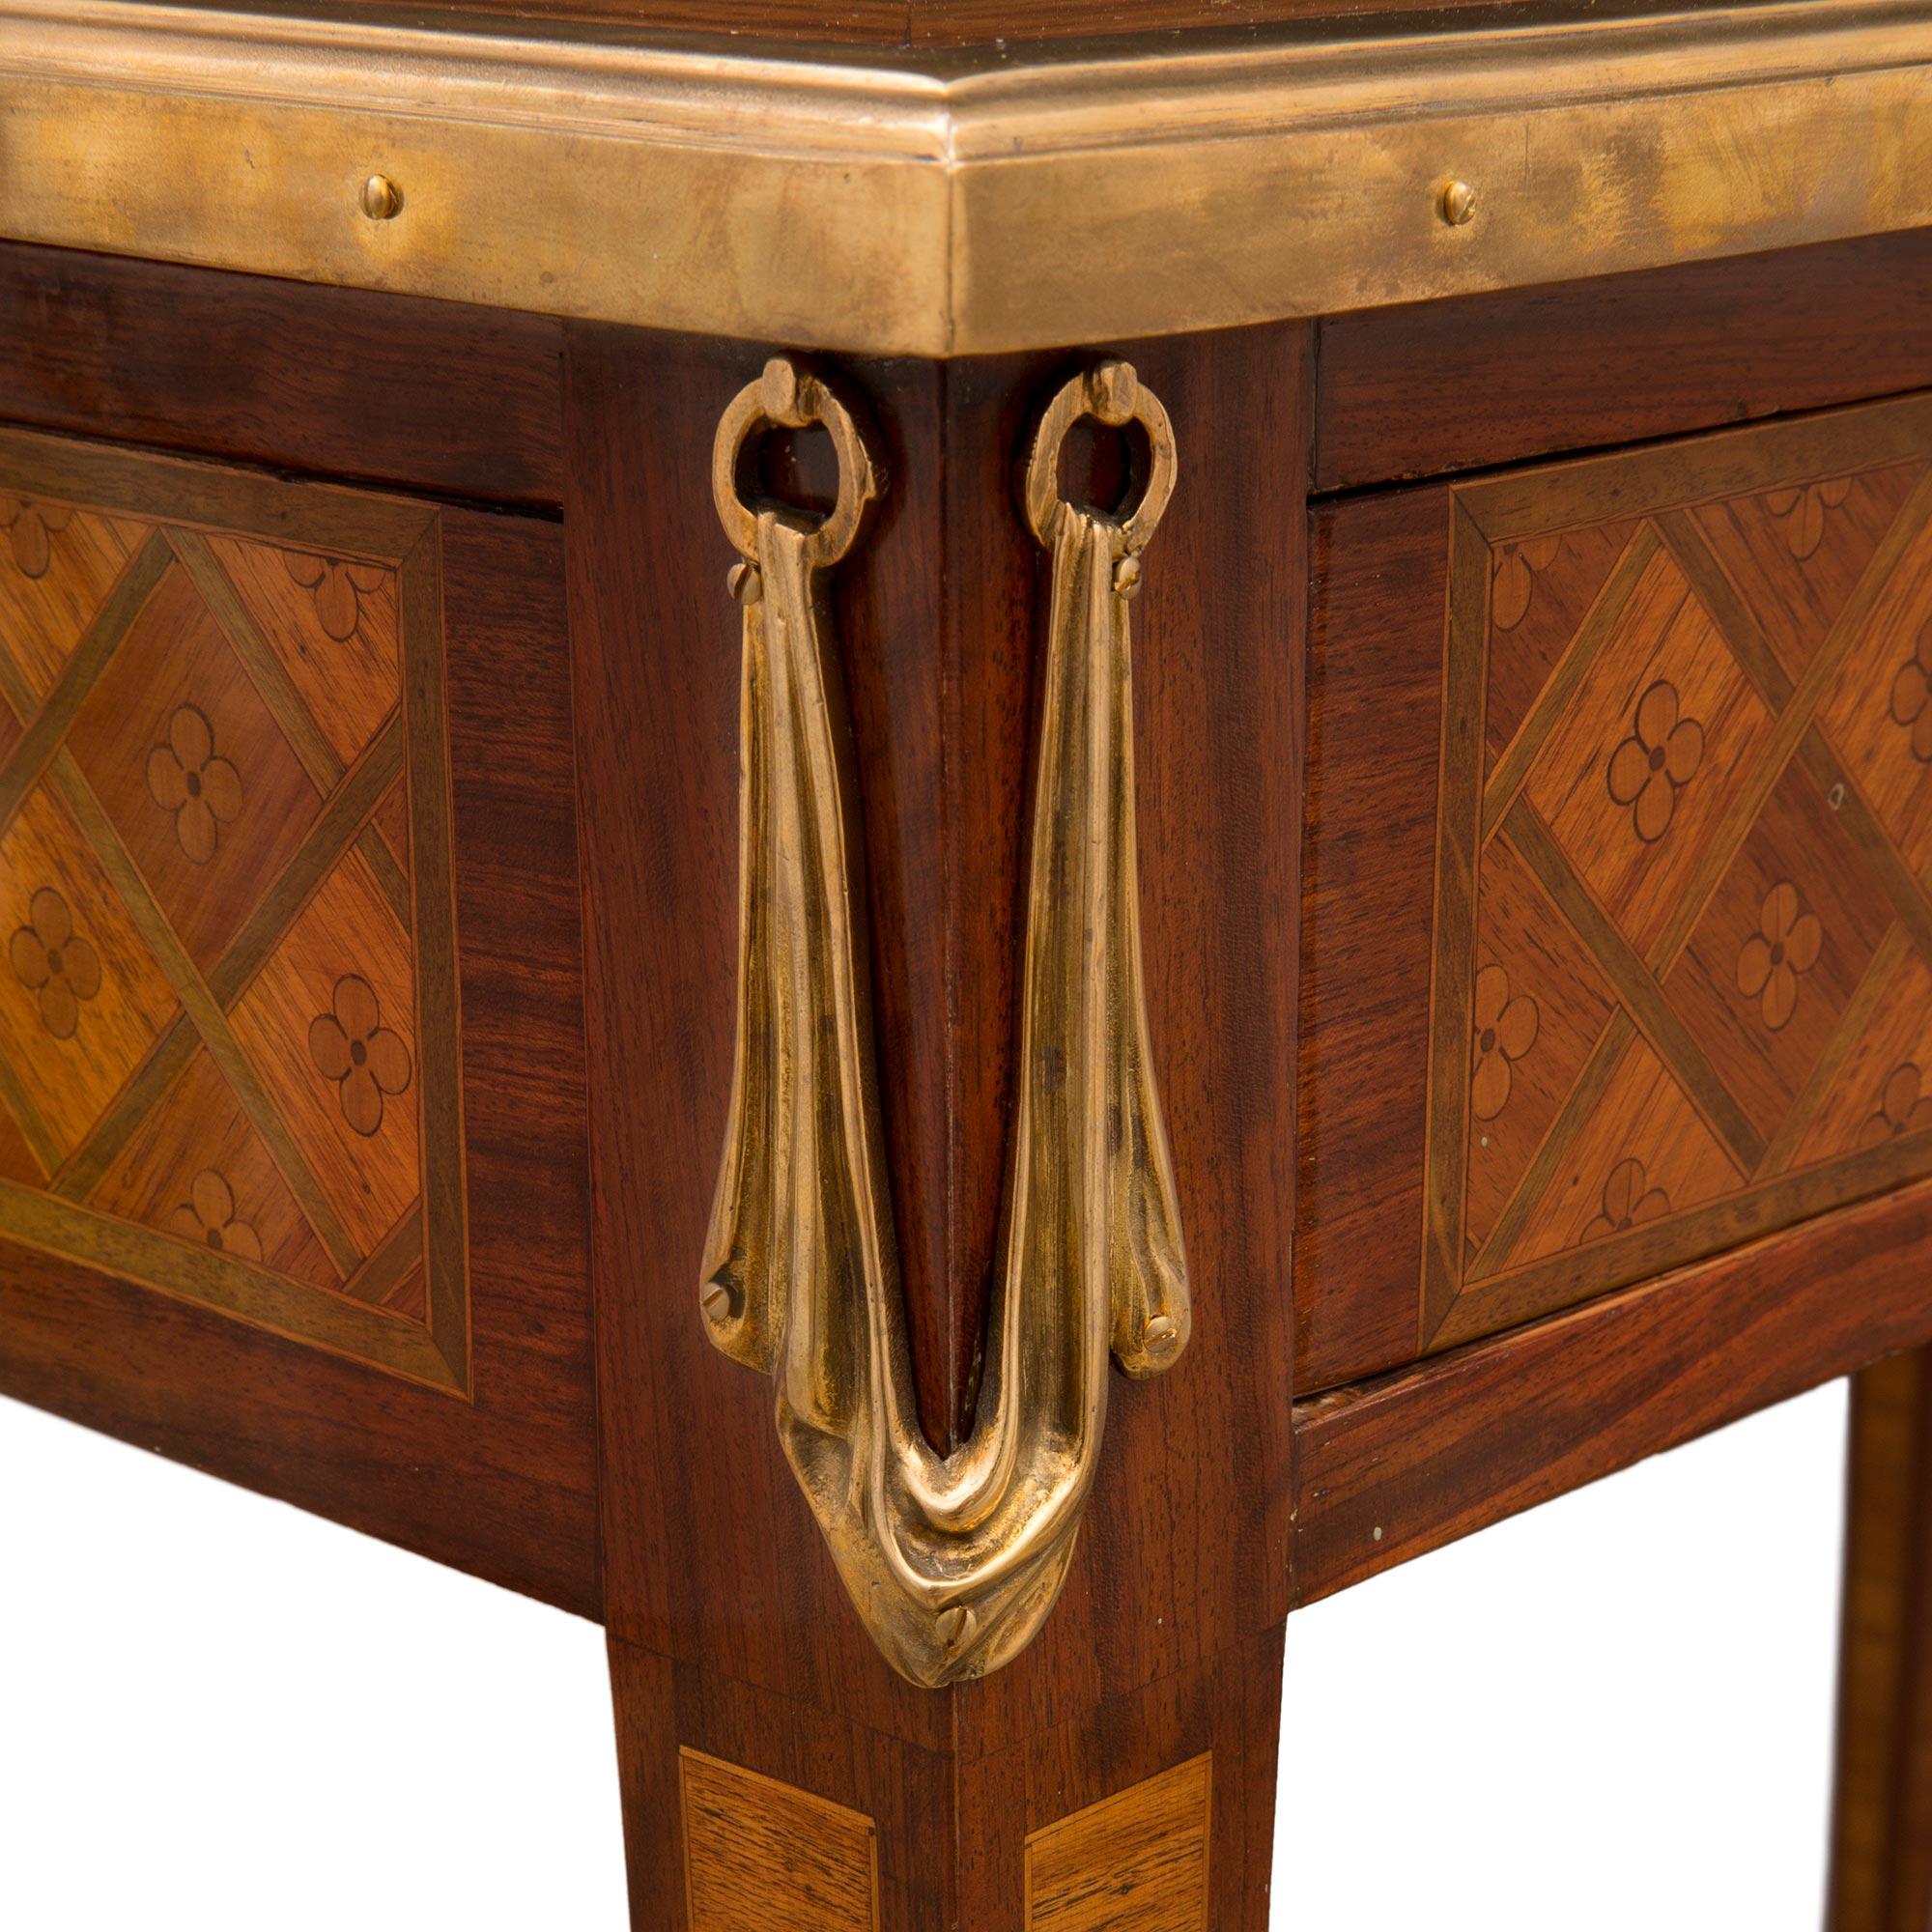 French Mid-19th Century Louis XVI Style Tulipwood, Kingwood and Charmwood Desk For Sale 4